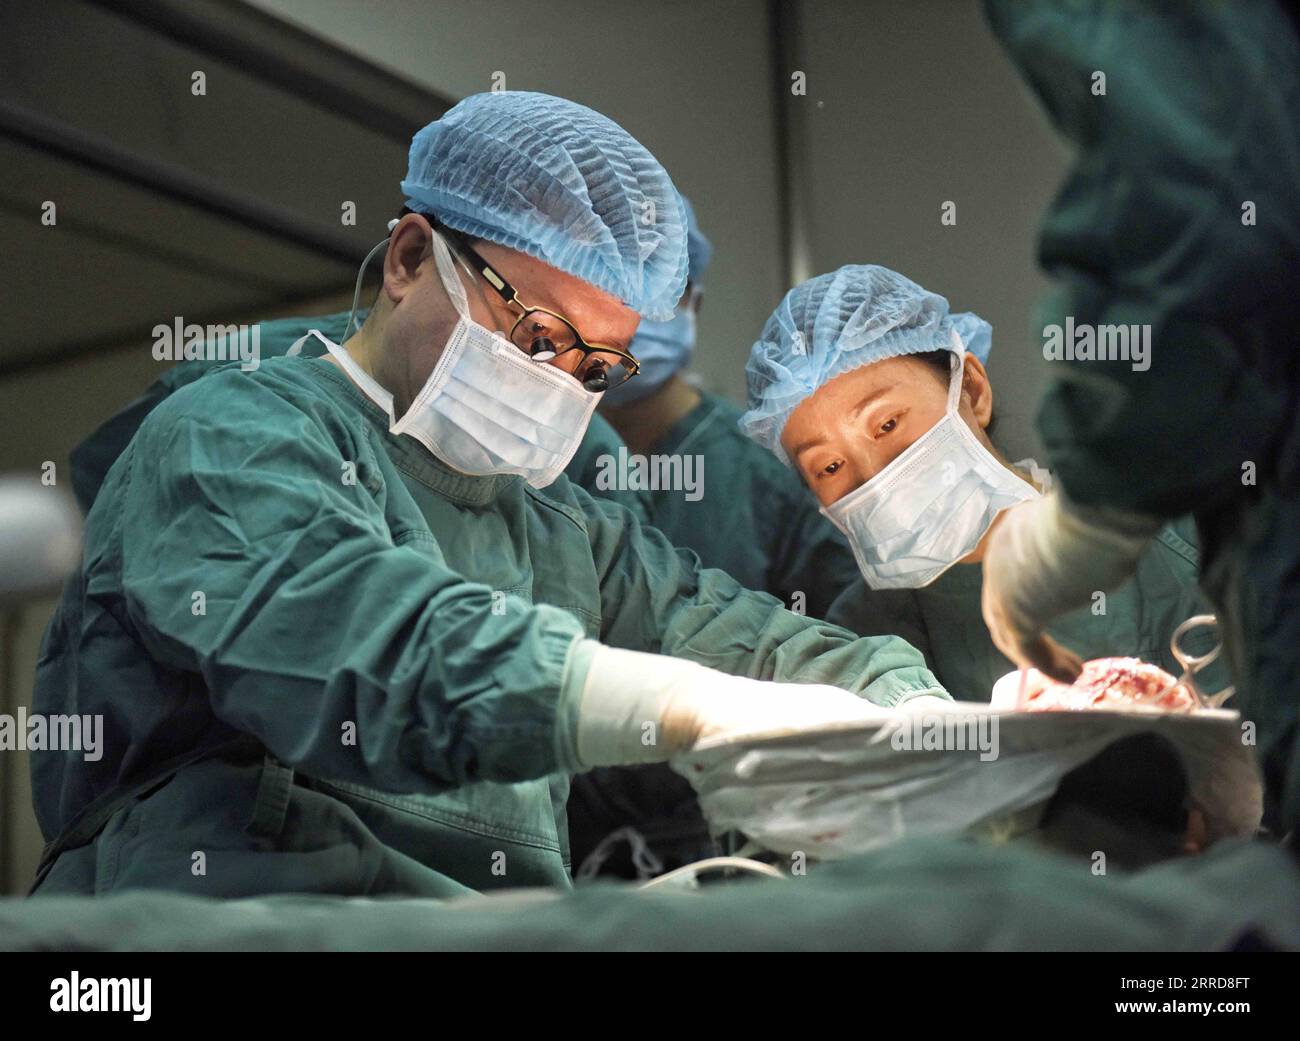 211210 -- CHENGDU, Dec. 10, 2021 -- Wang Wentao L uses the technology of extracorporeal hepatectomy plus liver autotransplantation in the treatment of a hydatid disease patient at a hospital in Tibetan Autonomous Prefecture of Garze, southwest China s Sichuan Province, Jan. 16, 2020. Wang Wentao, deputy director of the liver surgery department at West China Hospital of Sichuan University, started his work on the prevention and control of hydatid disease in Tibetan Autonomous Prefecture of Garze in 2006 when he learned that some local people suffer from hydatid disease during one of his free cl Stock Photo